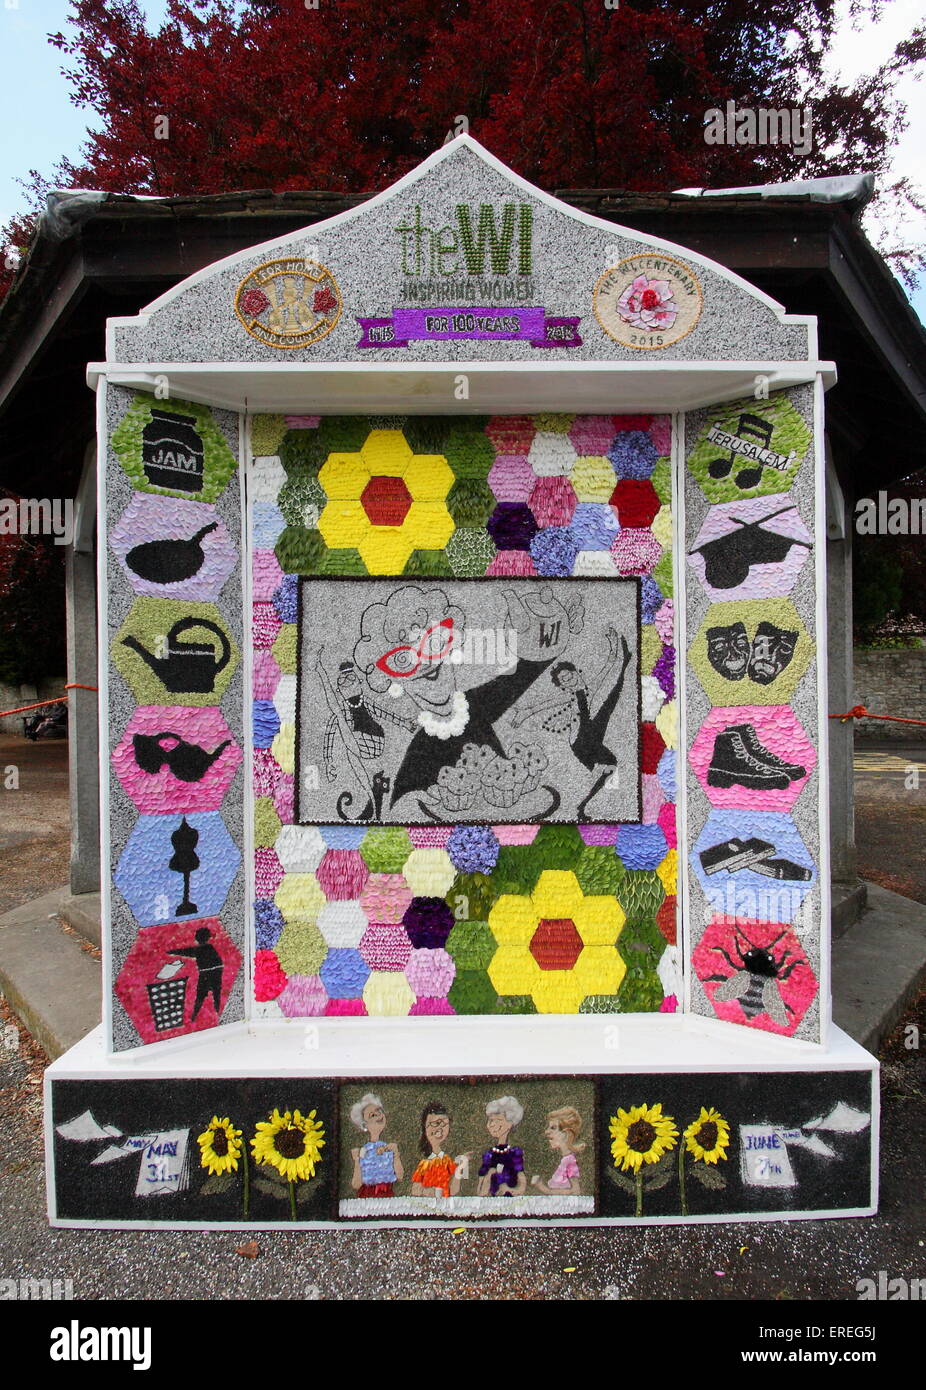 A well dressing commemorates the 100th anniversary of the founding of the Women's Institute, Peak District, Derbyshire UK 2015 Stock Photo